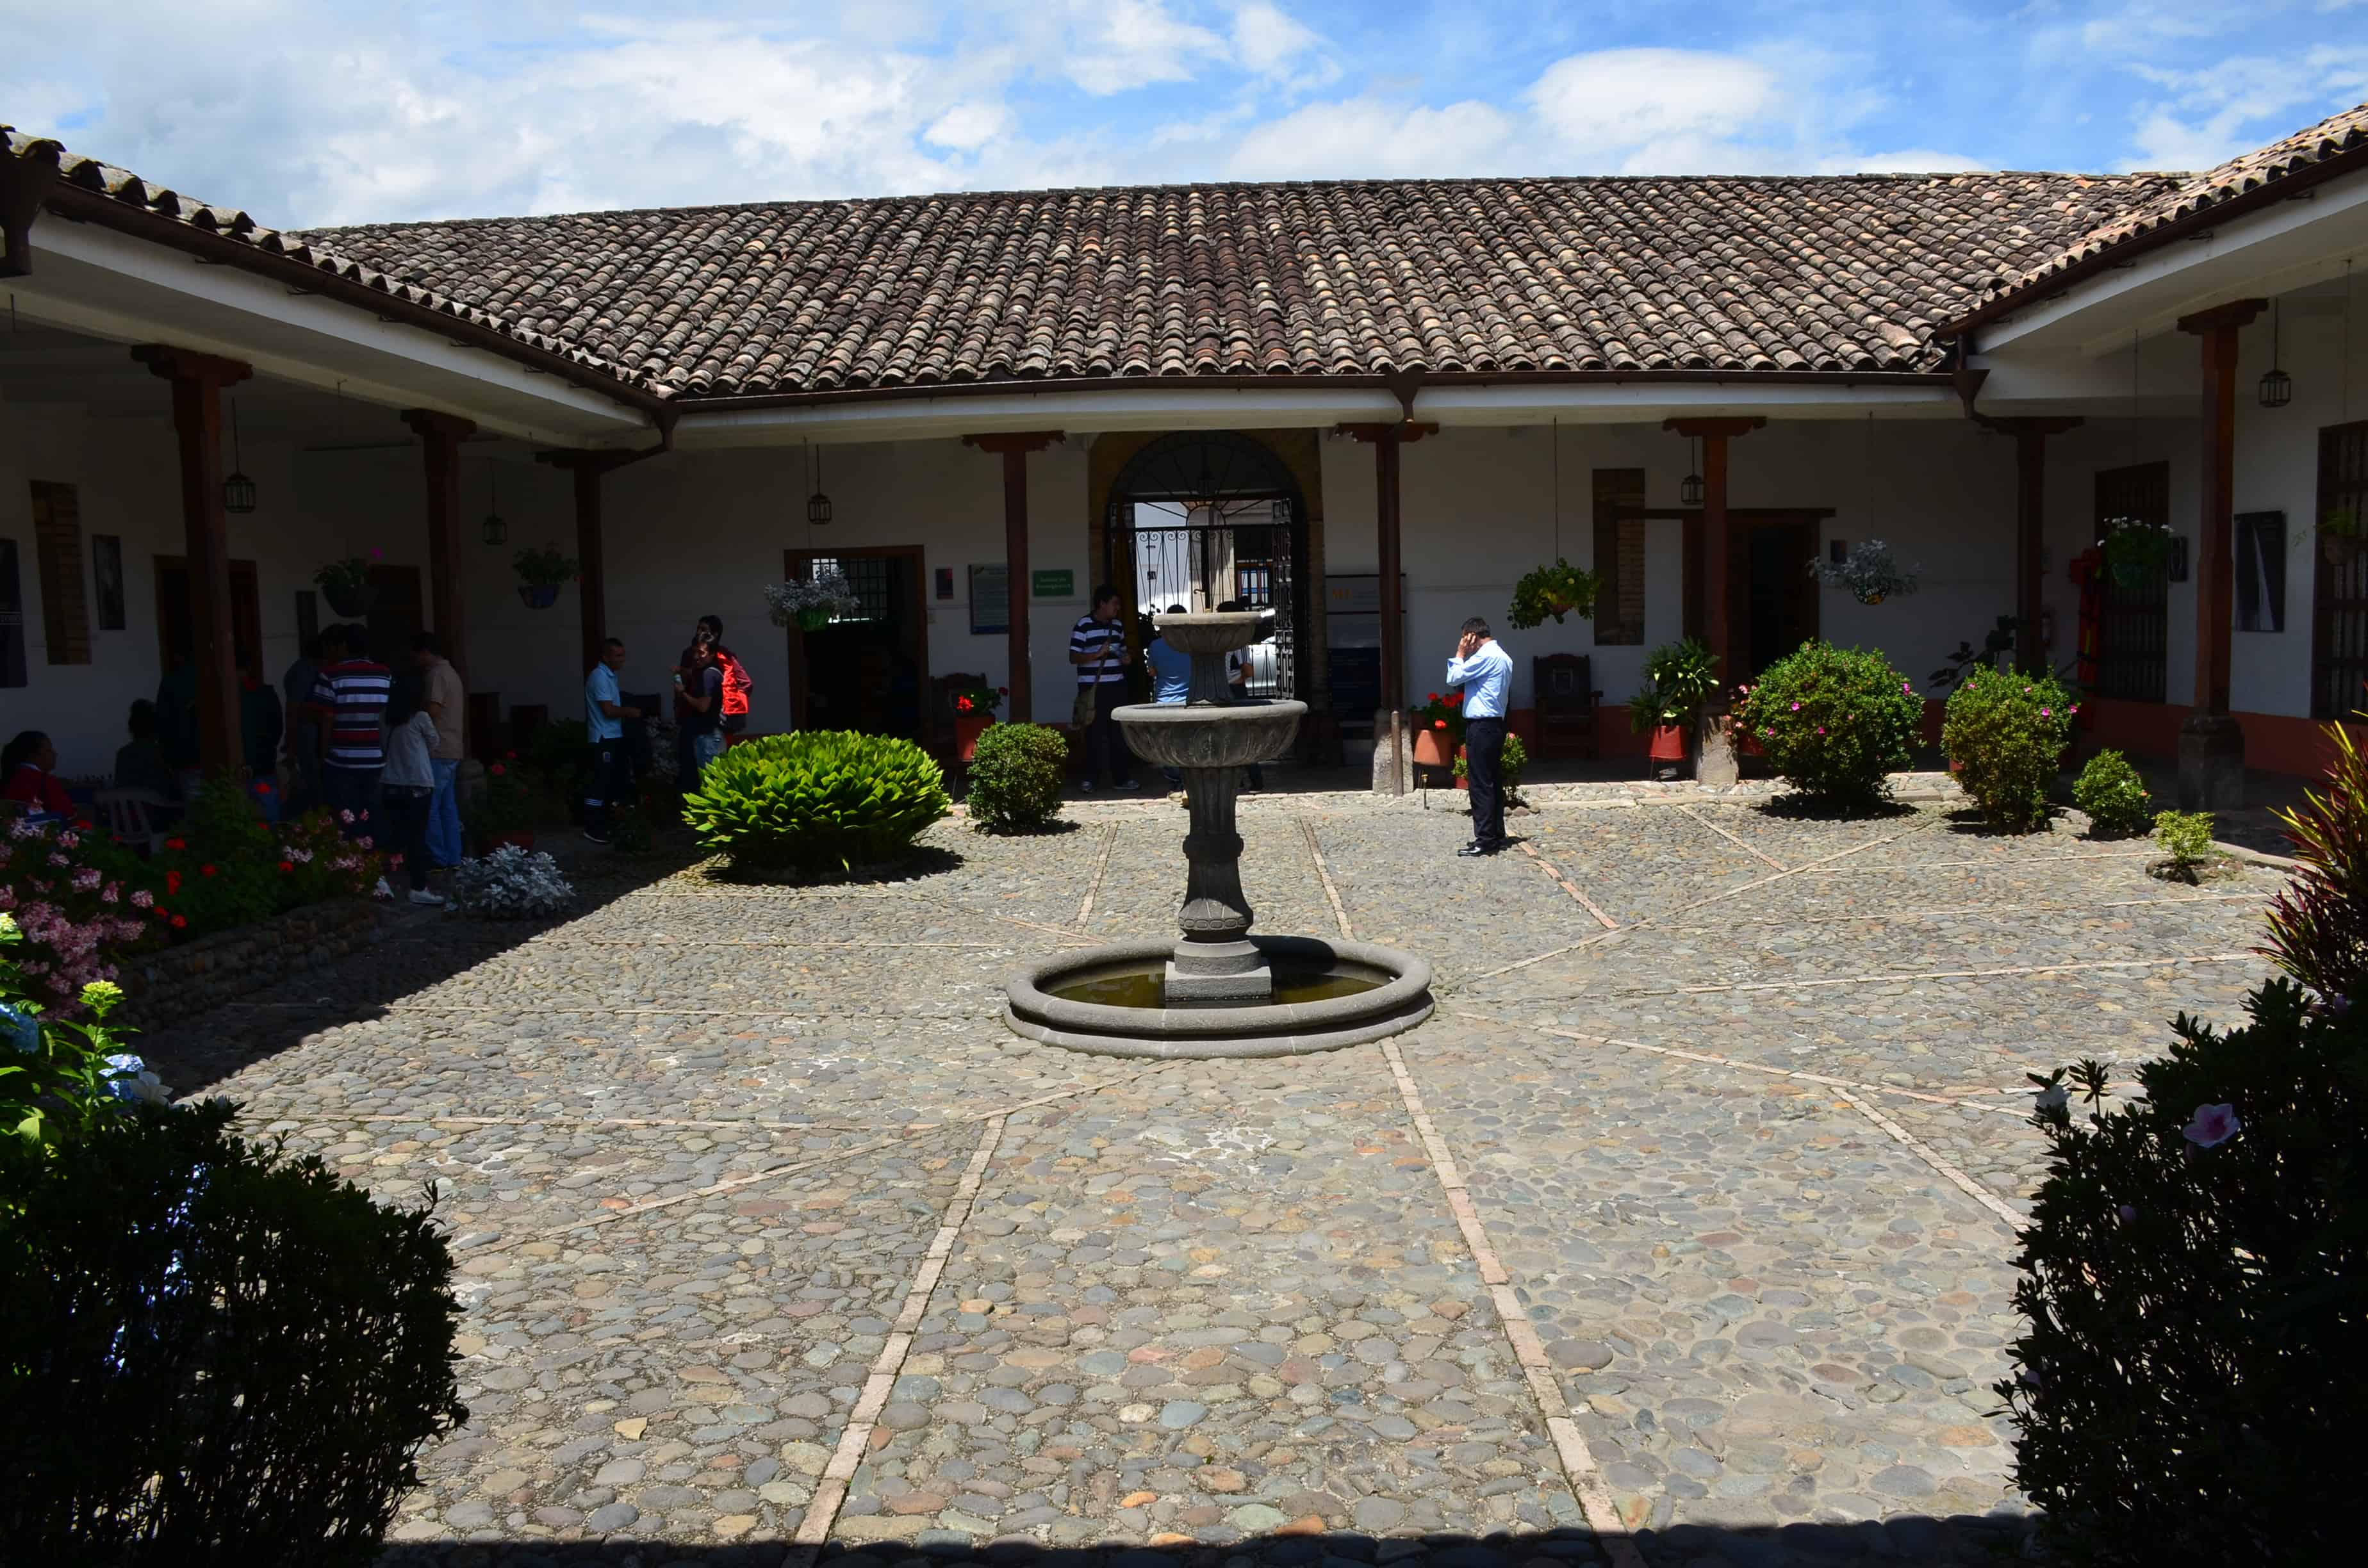 Courtyard of the Mosquera House Museum in Popayán, Cauca, Colombia